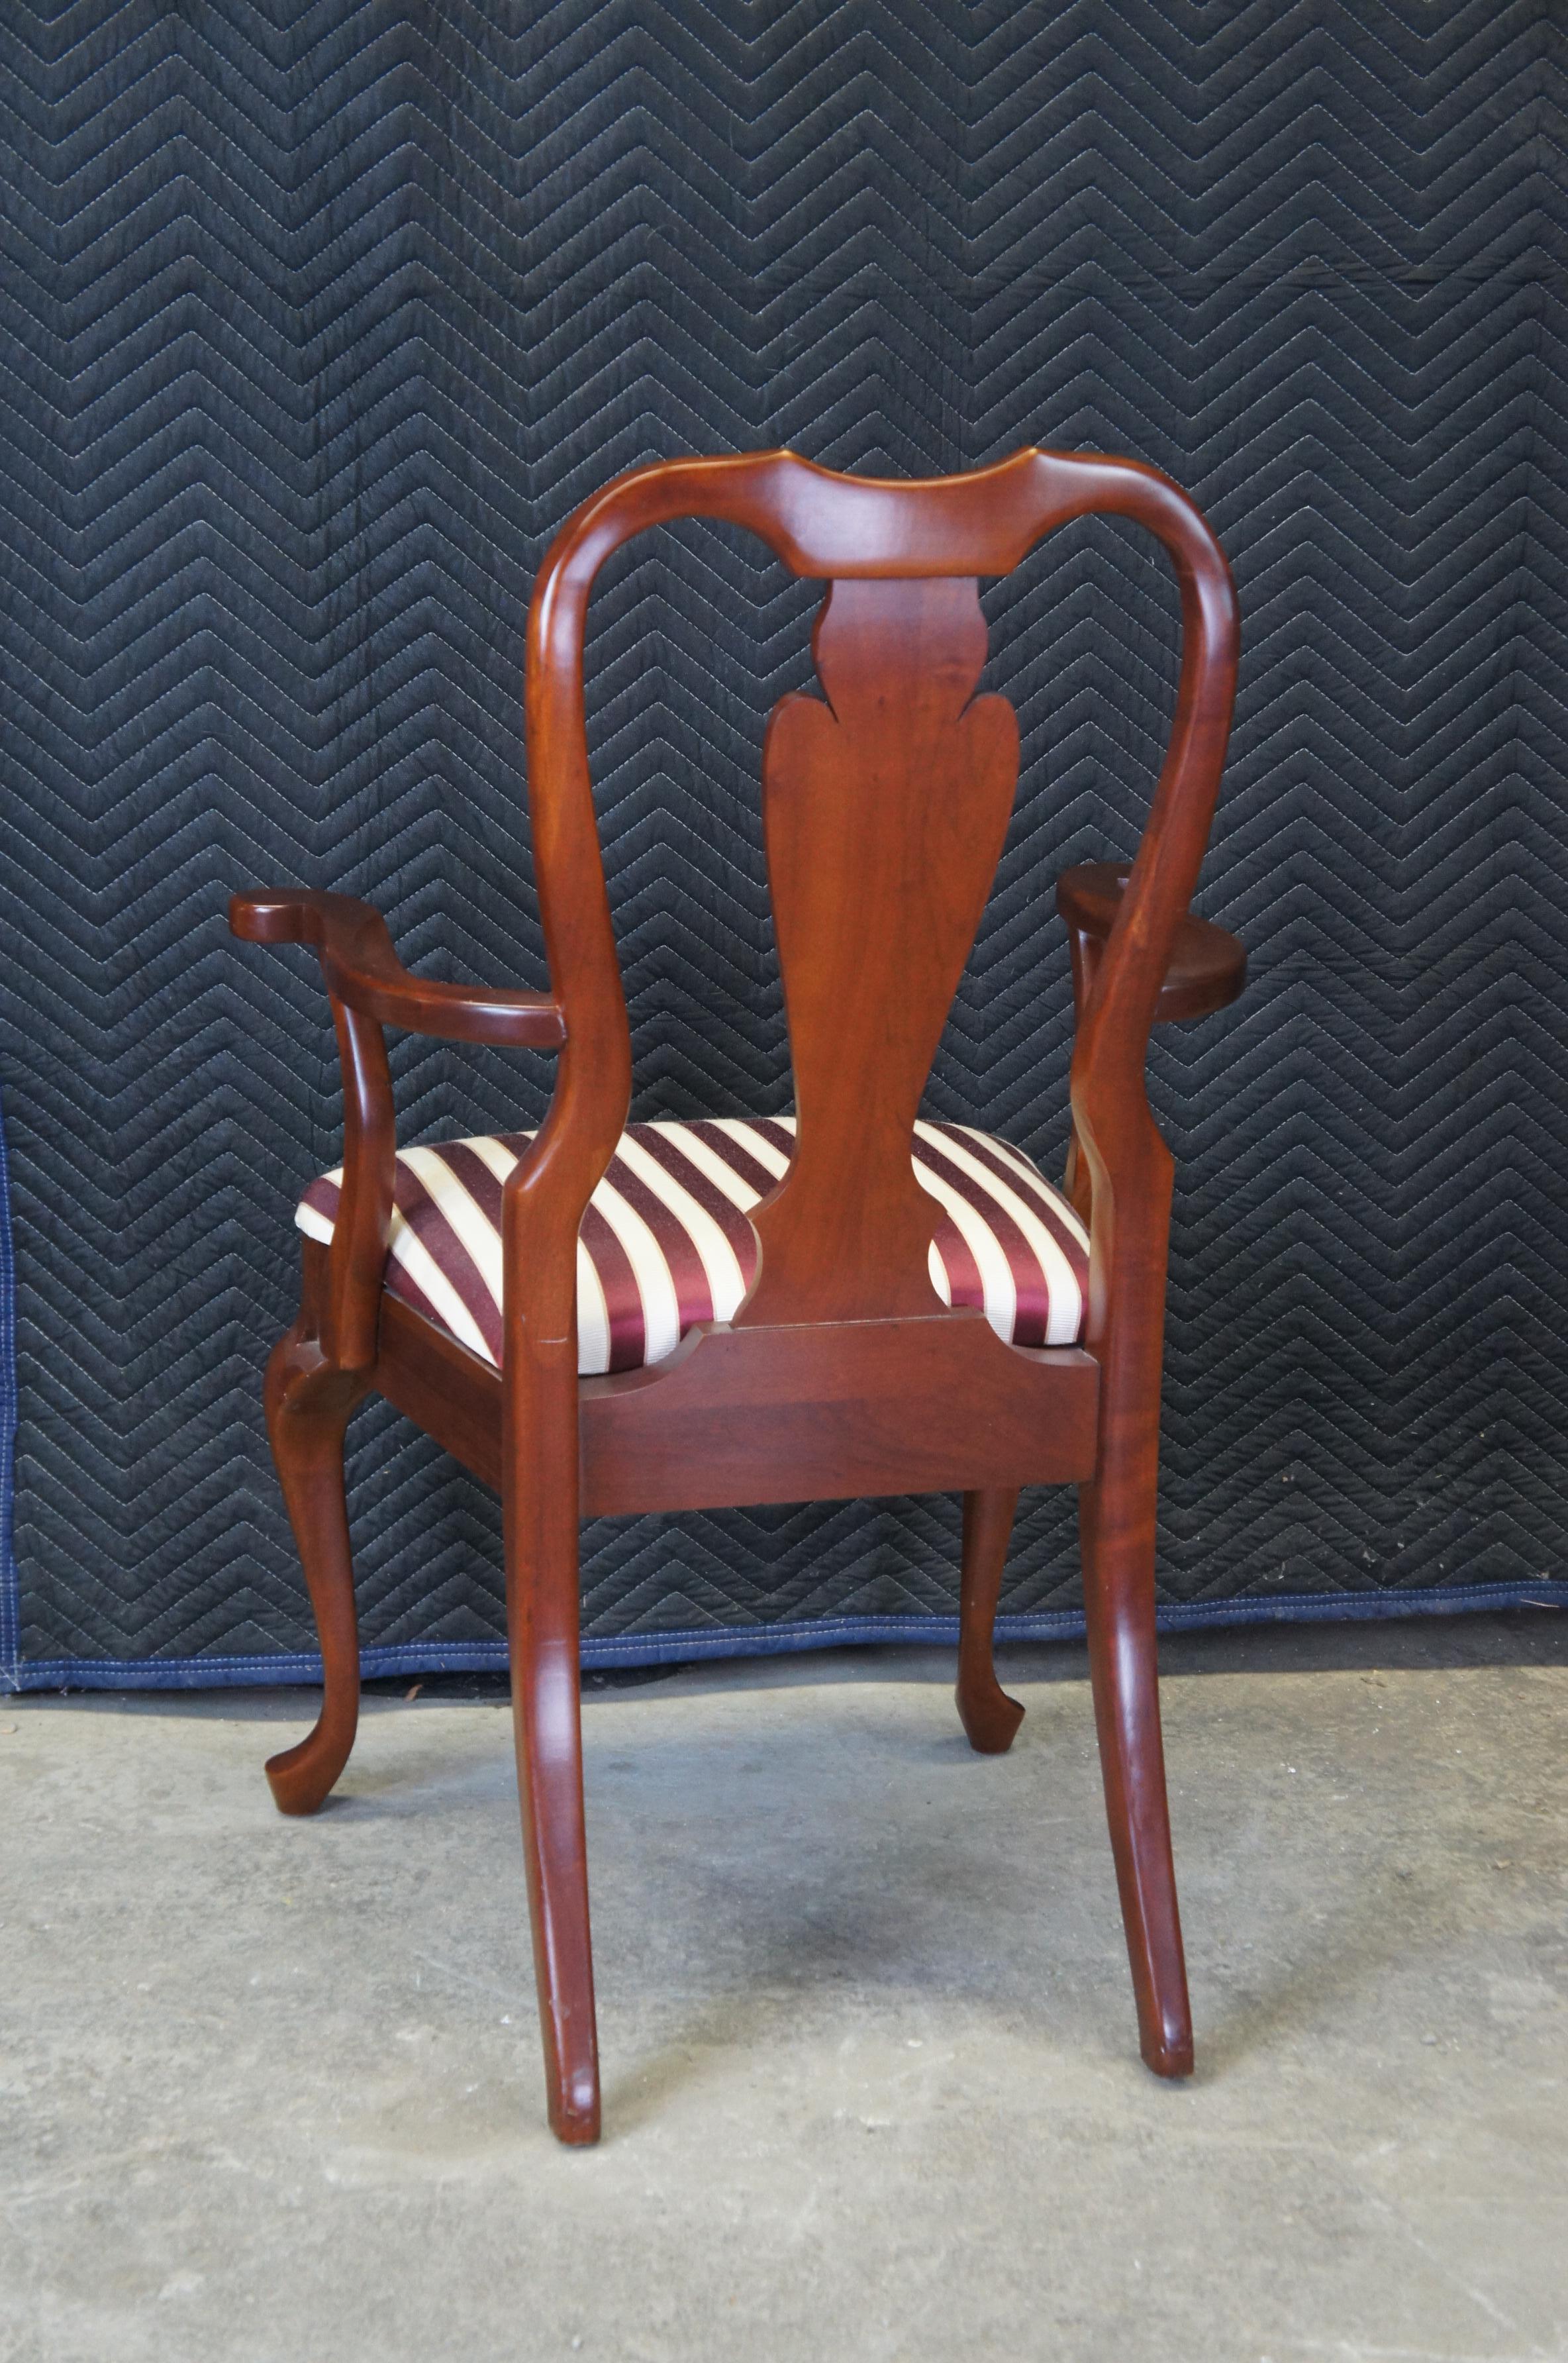 Upholstery 6 Vintage Cresent Queen Anne Style Cherry Dining Chairs Striped Upholstered Seat